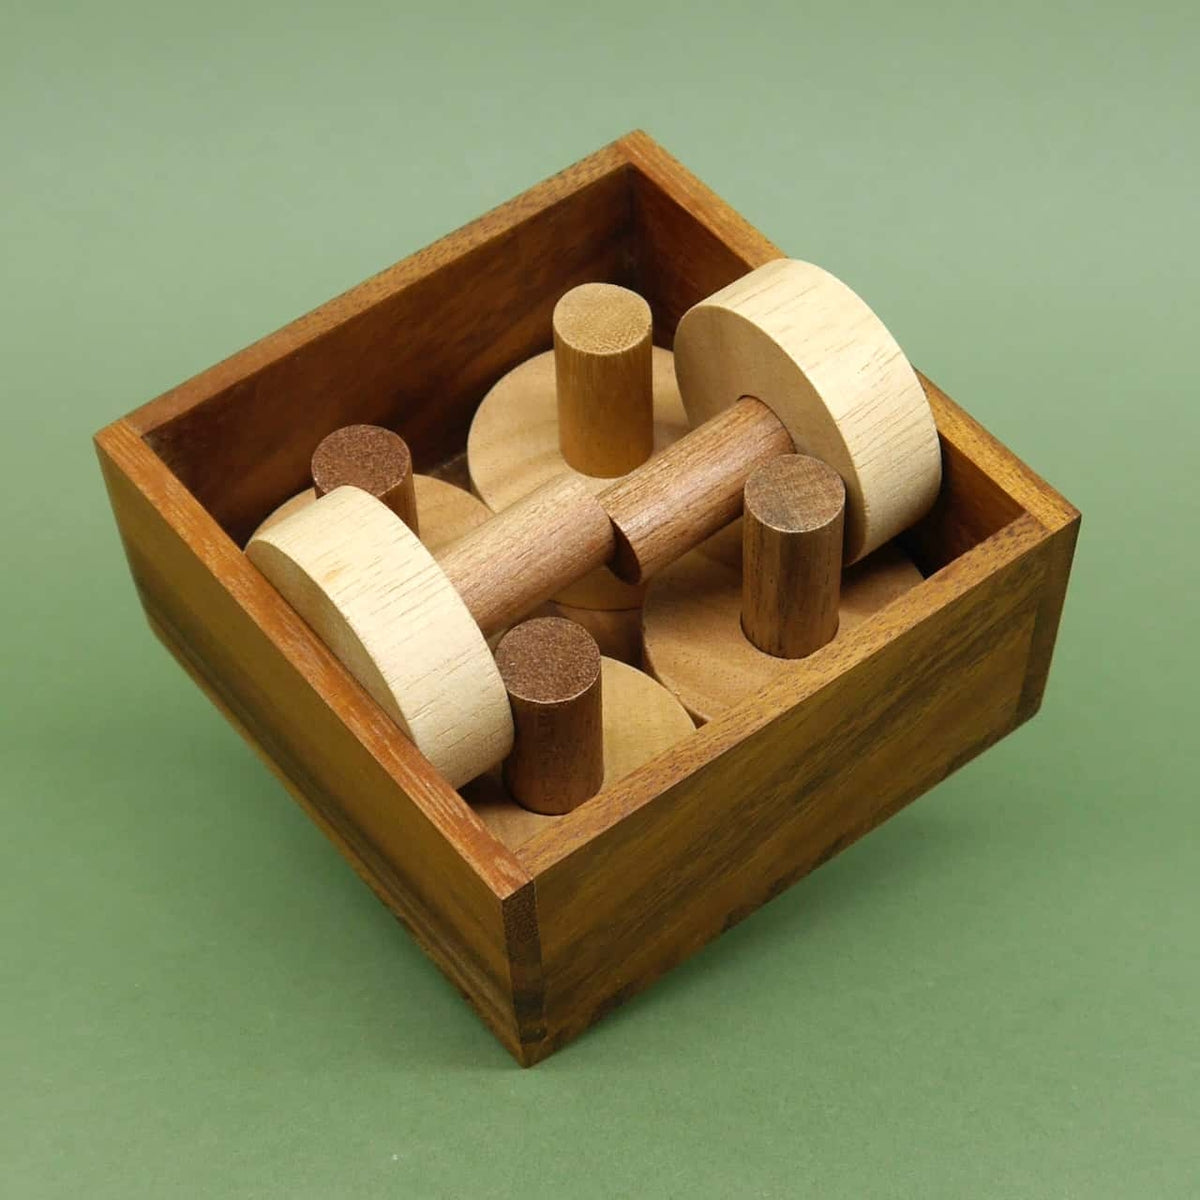 CURLING BOX - das etwas anderes Packing-Puzzle